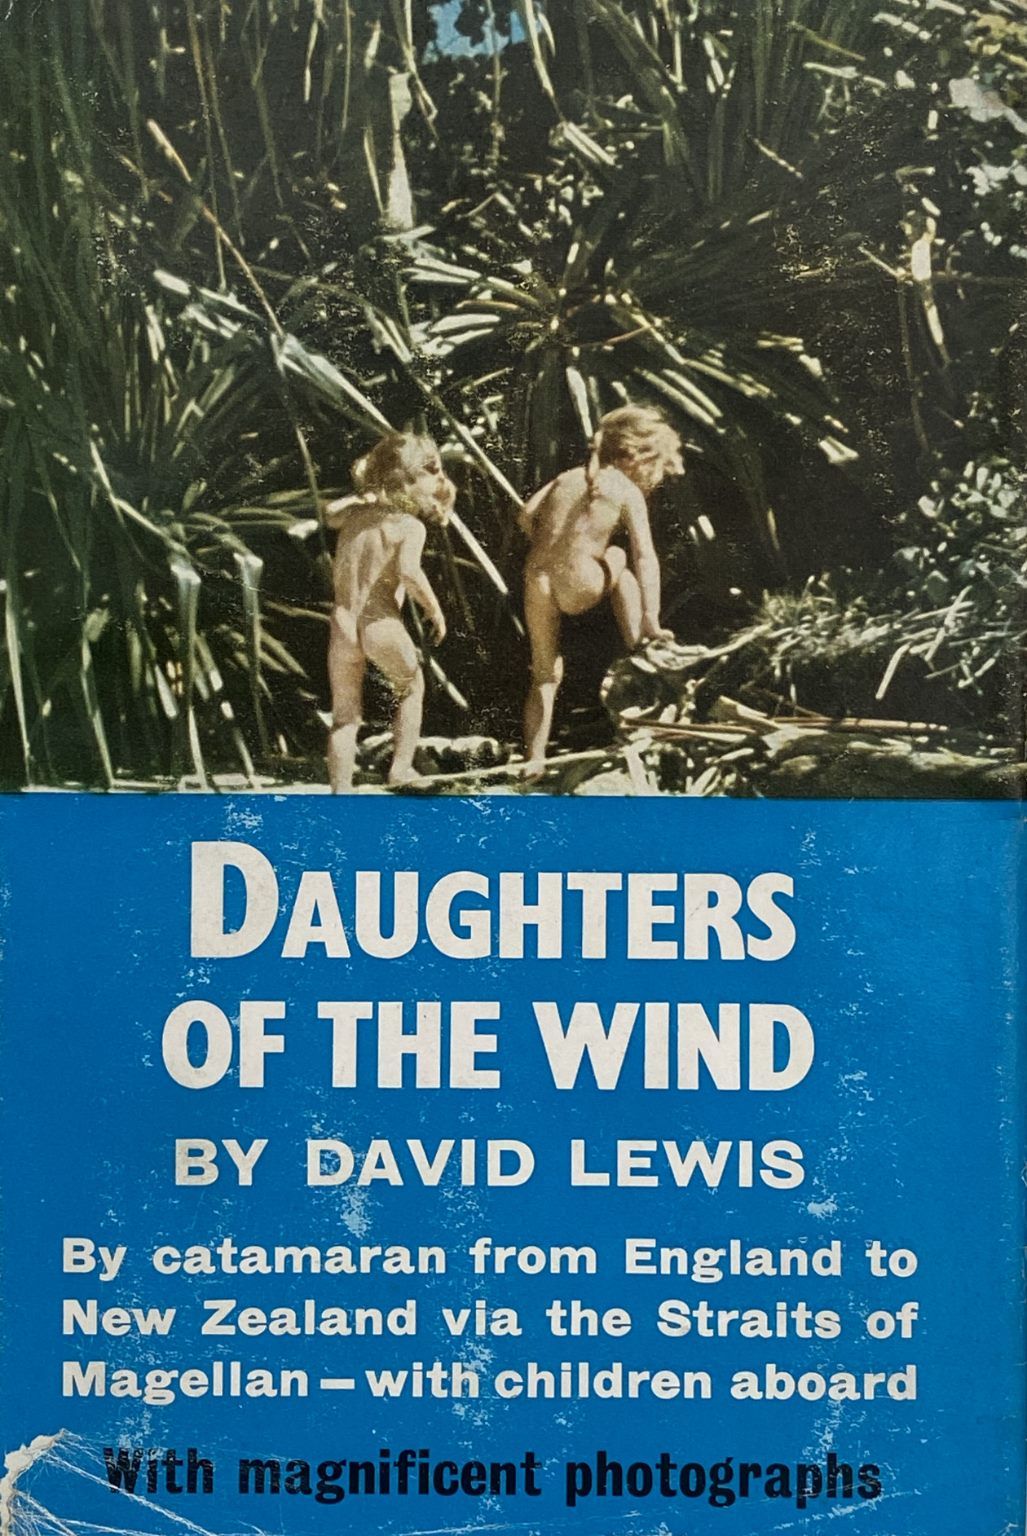 DAUGHTERS OF THE WIND